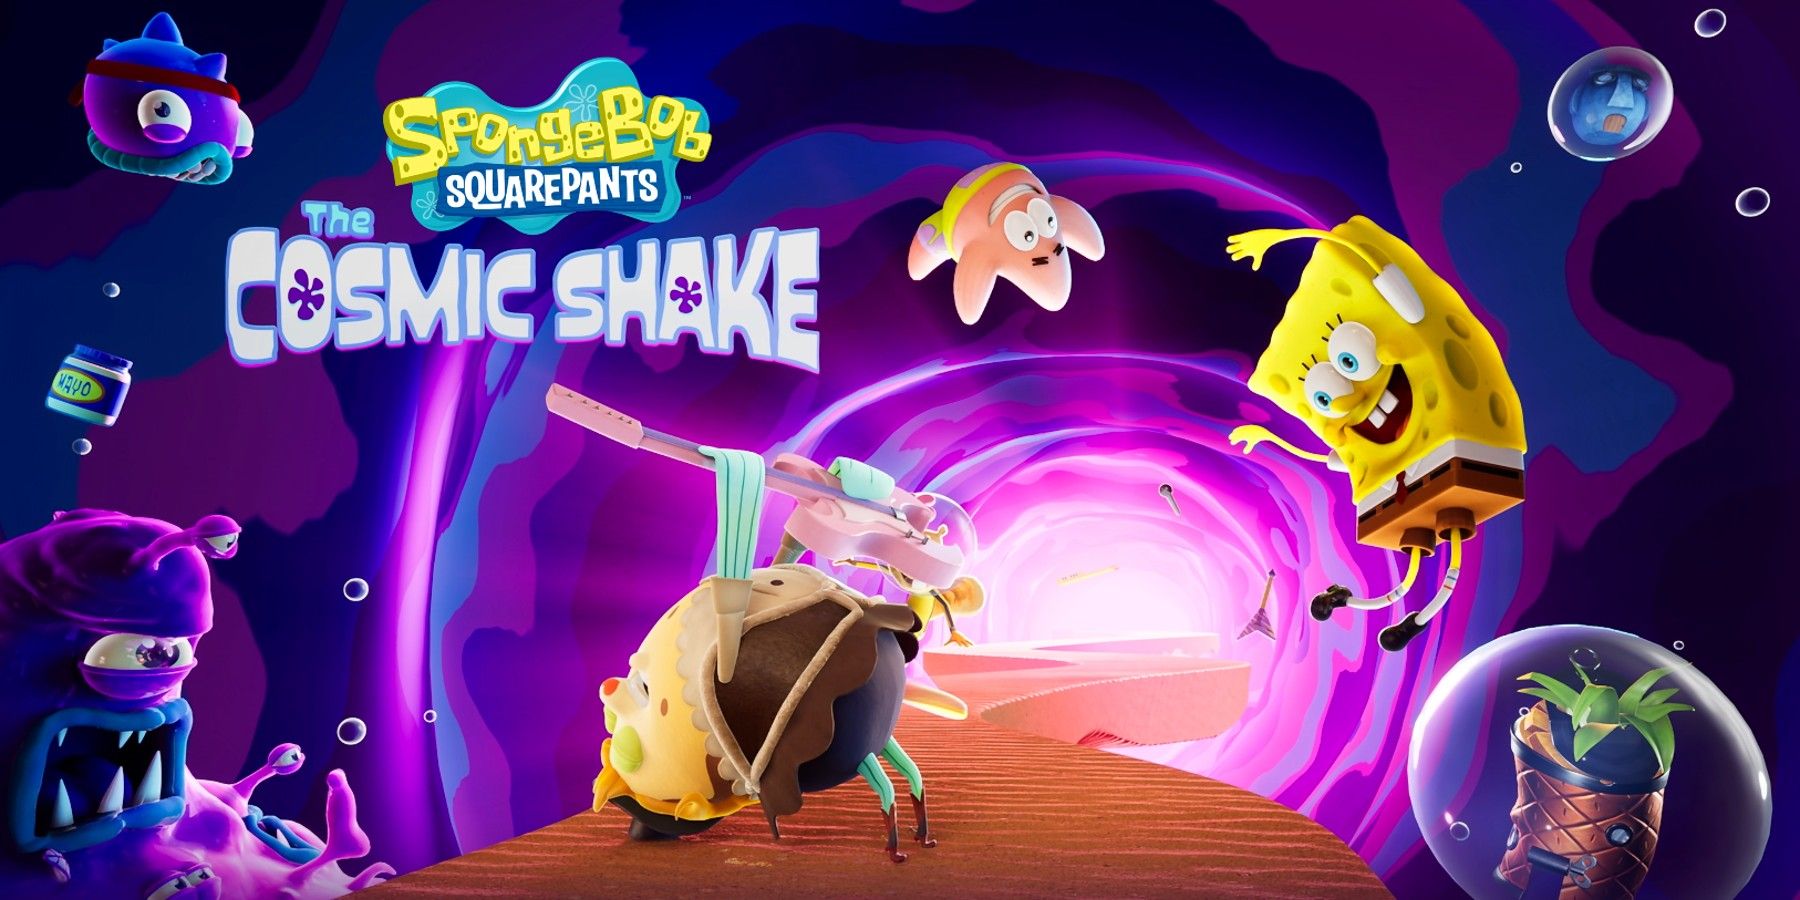 SpongeBob SquarePants: The Cosmic Shake Announced for Consoles and PC